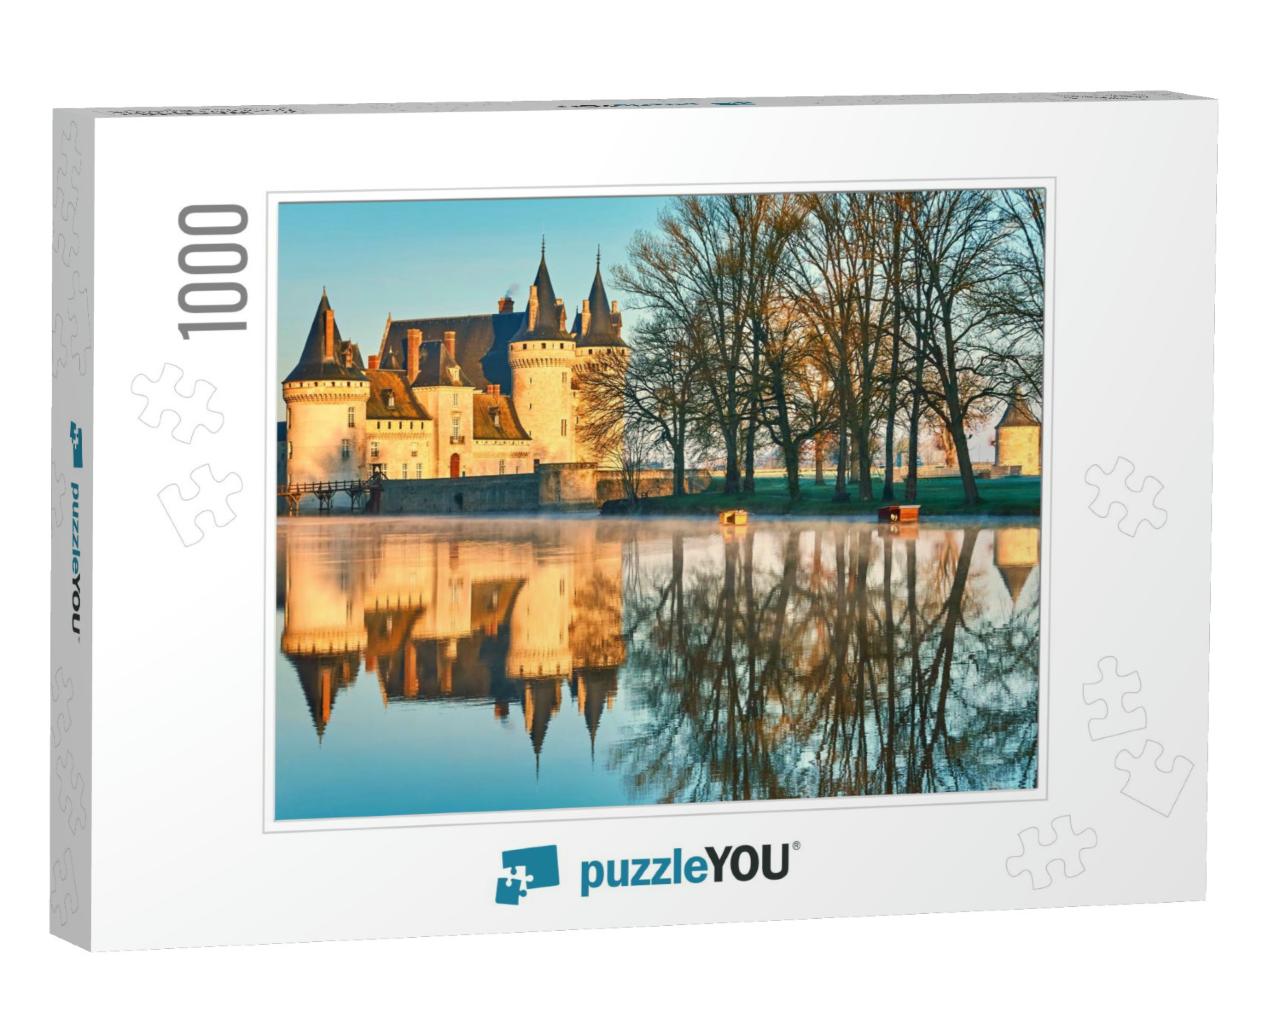 Chateau De Sully-Sur-Loire in the Sunset Light, France. I... Jigsaw Puzzle with 1000 pieces